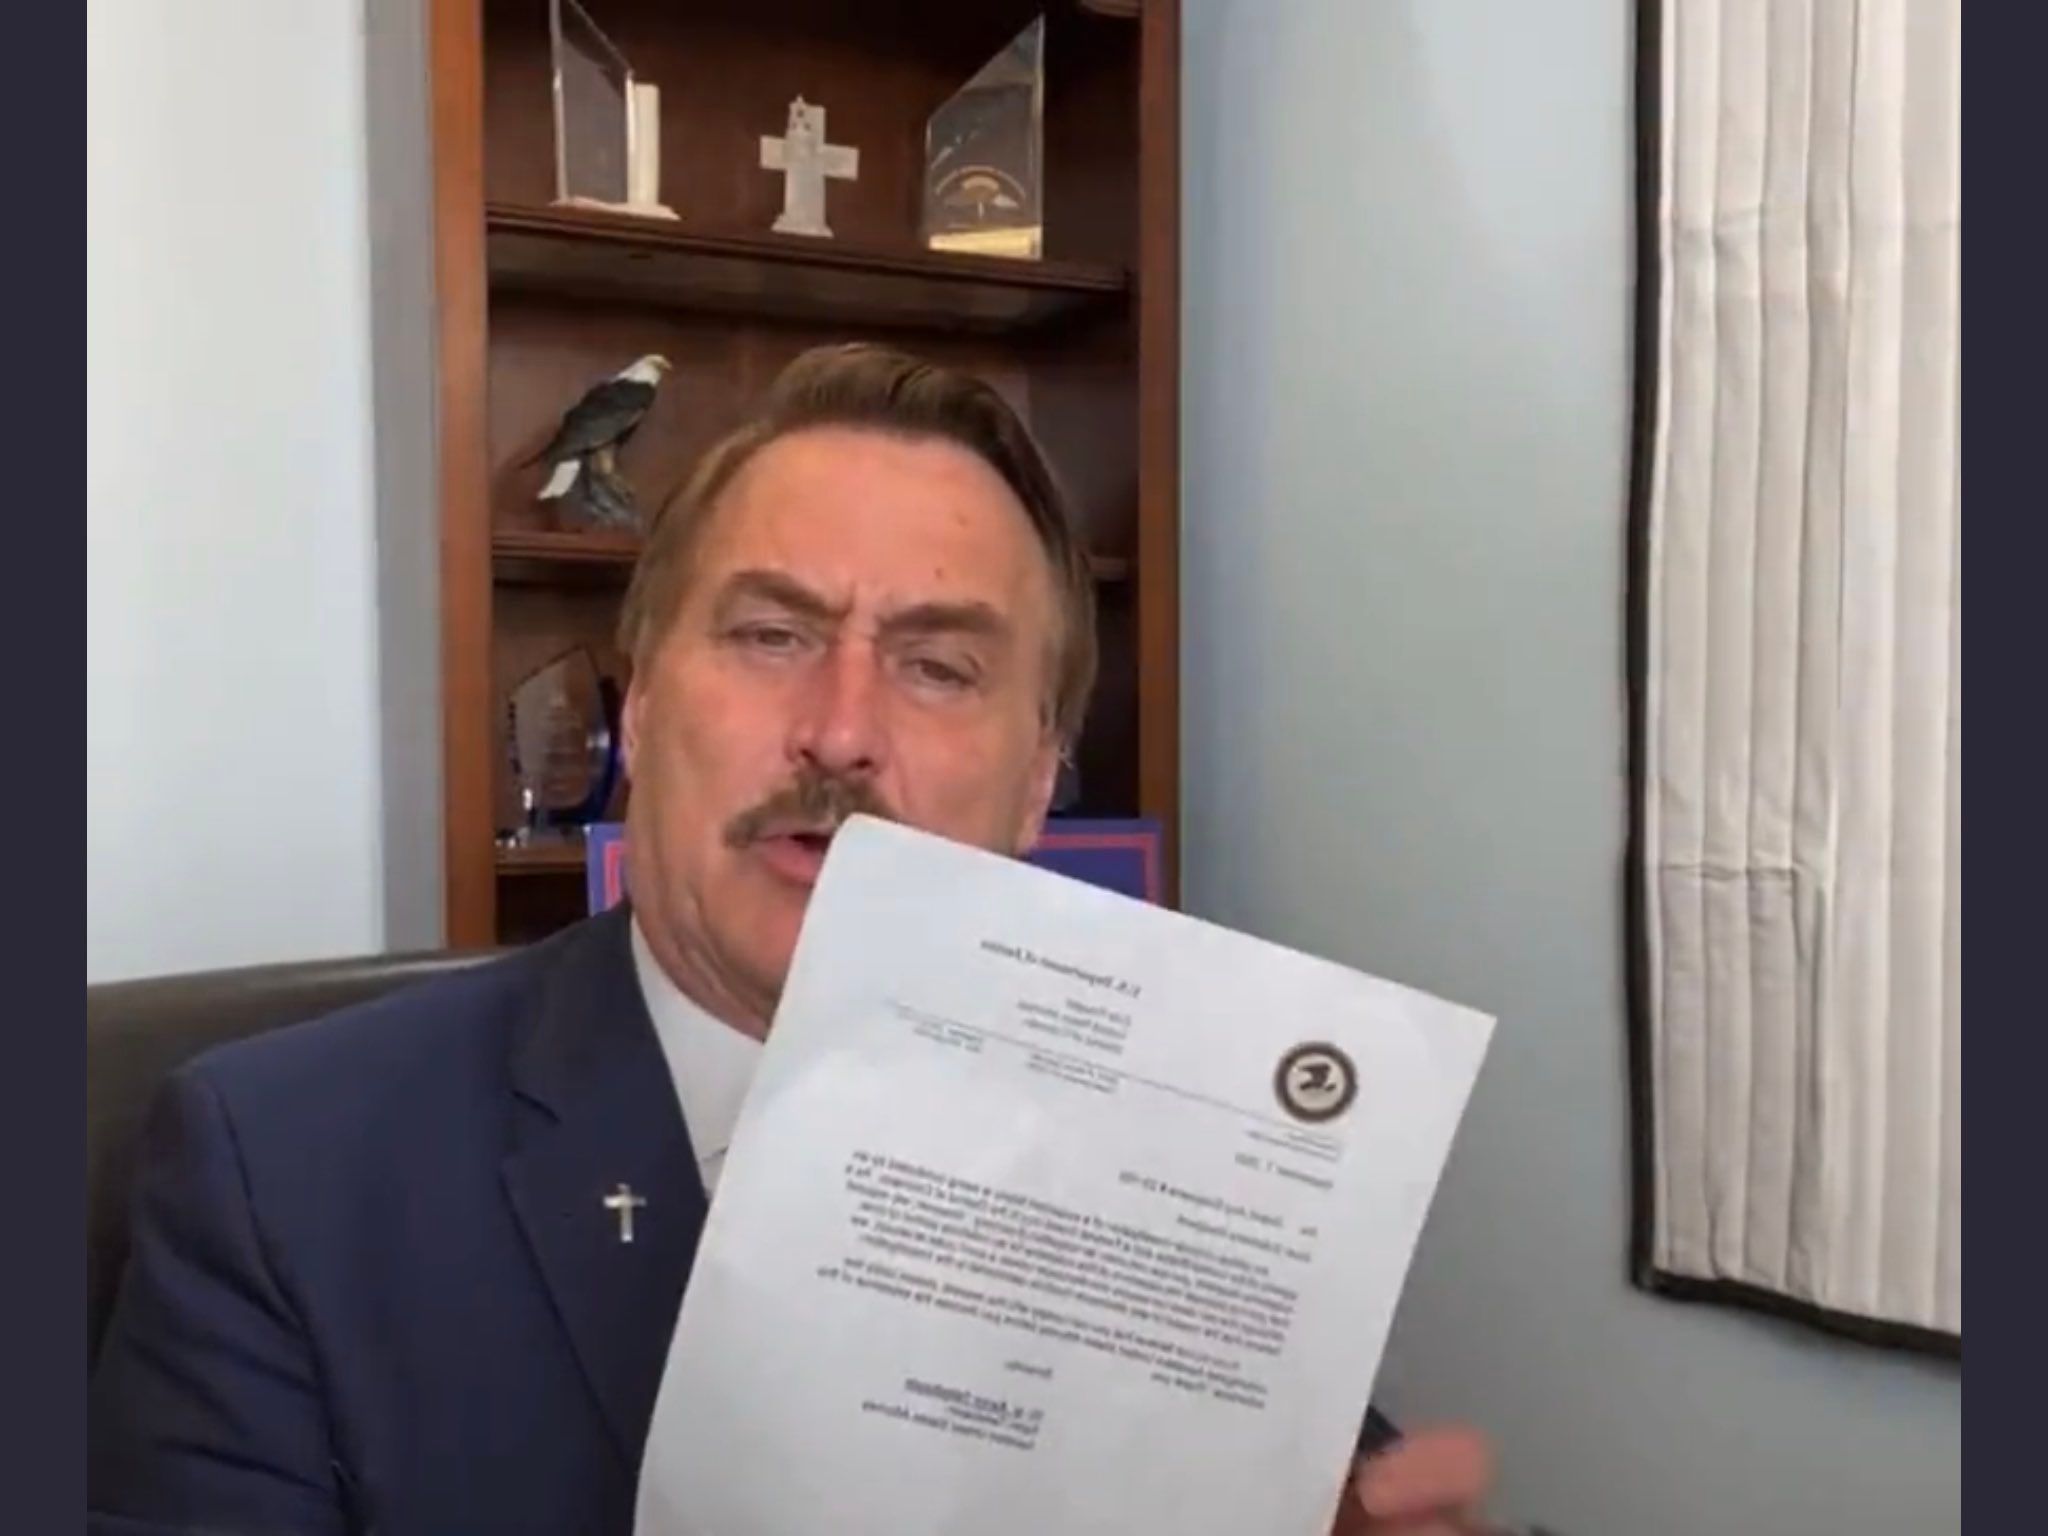 Pro-Trump My Pillow CEO Mike Lindell’s phone seized by FBI